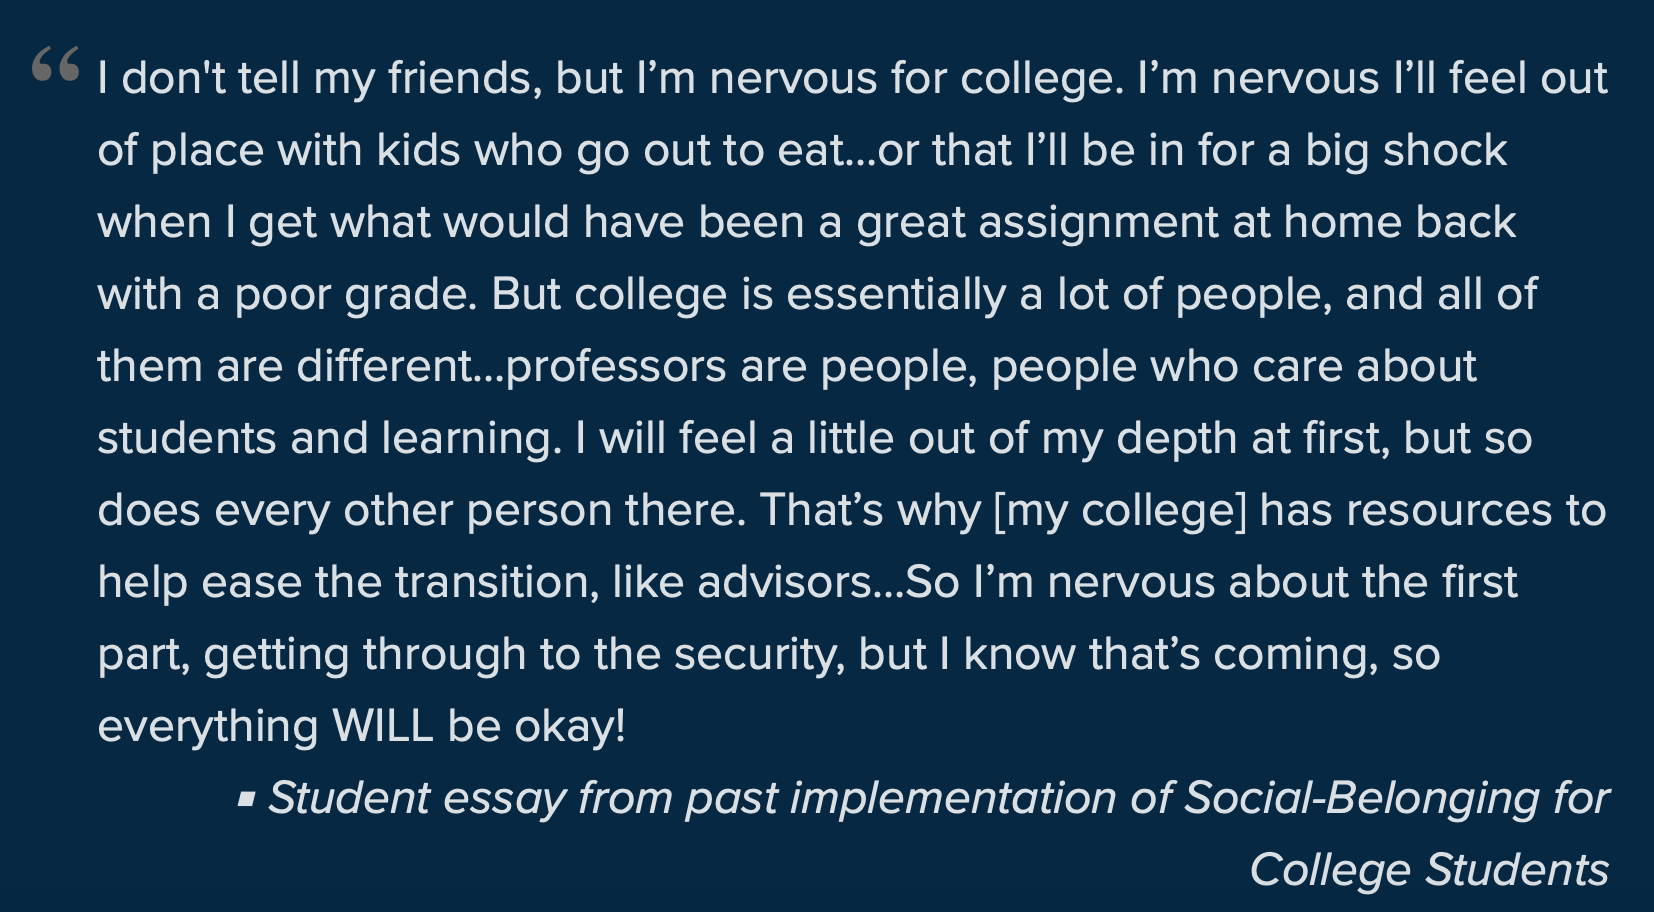 I don't tell my friends, but I’m nervous for college. I’m nervous I’ll feel out of place with kids who go out to eat…or that I’ll be in for a big shock when I get what would have been a great assignment at home back with a poor grade. But college is essentially a lot of people, and all of them are different…professors are people, people who care about students and learning. I will feel a little out of my depth at first, but so does every other person there. That’s why [my college] has resources to help ease the transition, like advisers…So I’m nervous about the first part, getting through to the security, but I know that’s coming, so everything WILL be okay! Student essay from past implementation of Social-Belonging for 